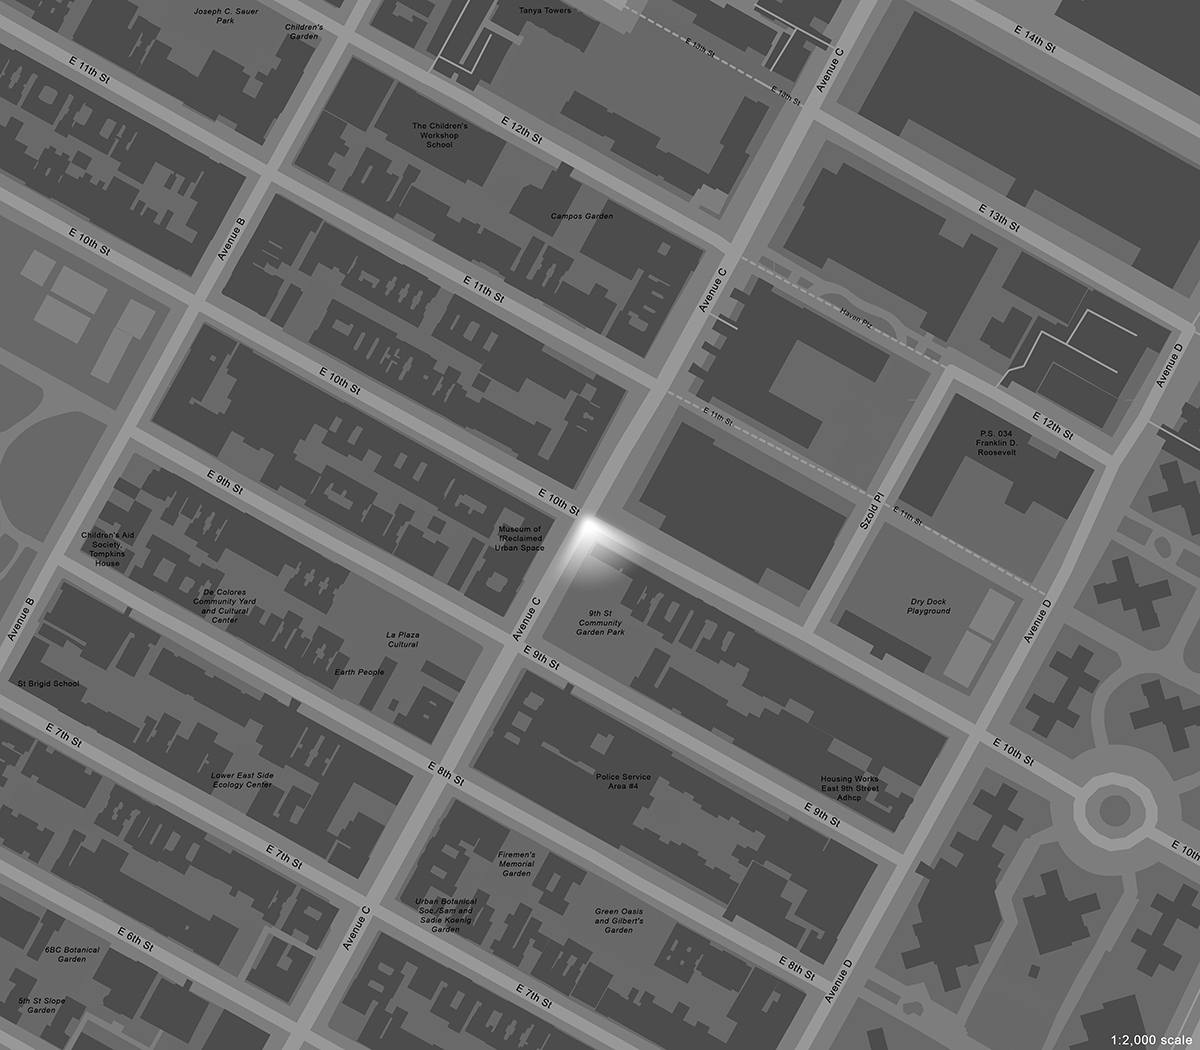 Aerial map of Manhattan, New York, showing a section of the Lower East Side between Avenue B and Avenue D. The corner of Avenue C and East 10th Street is highlighted.